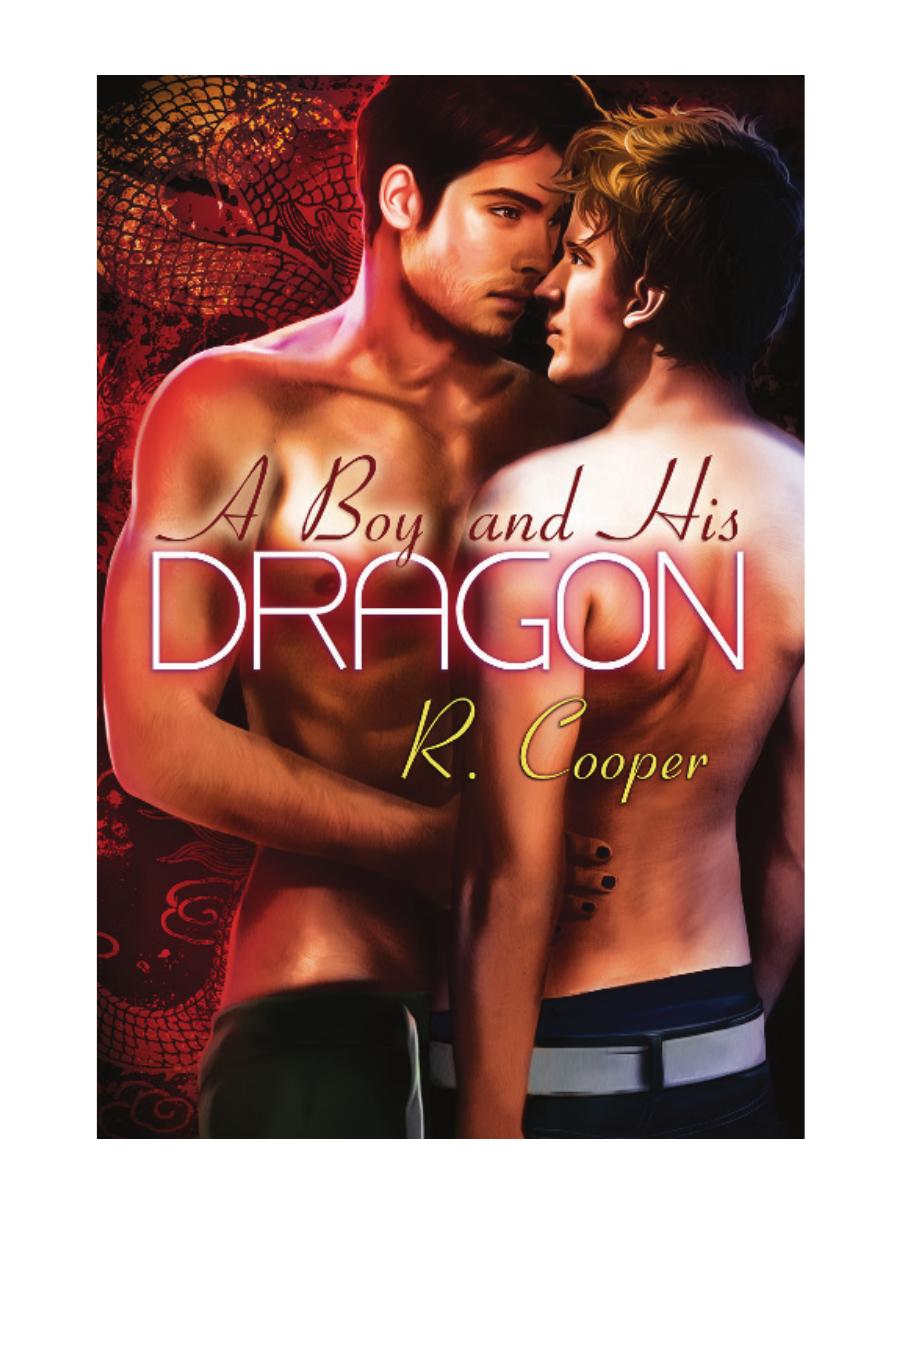 A Boy and His Dragon by R. Cooper